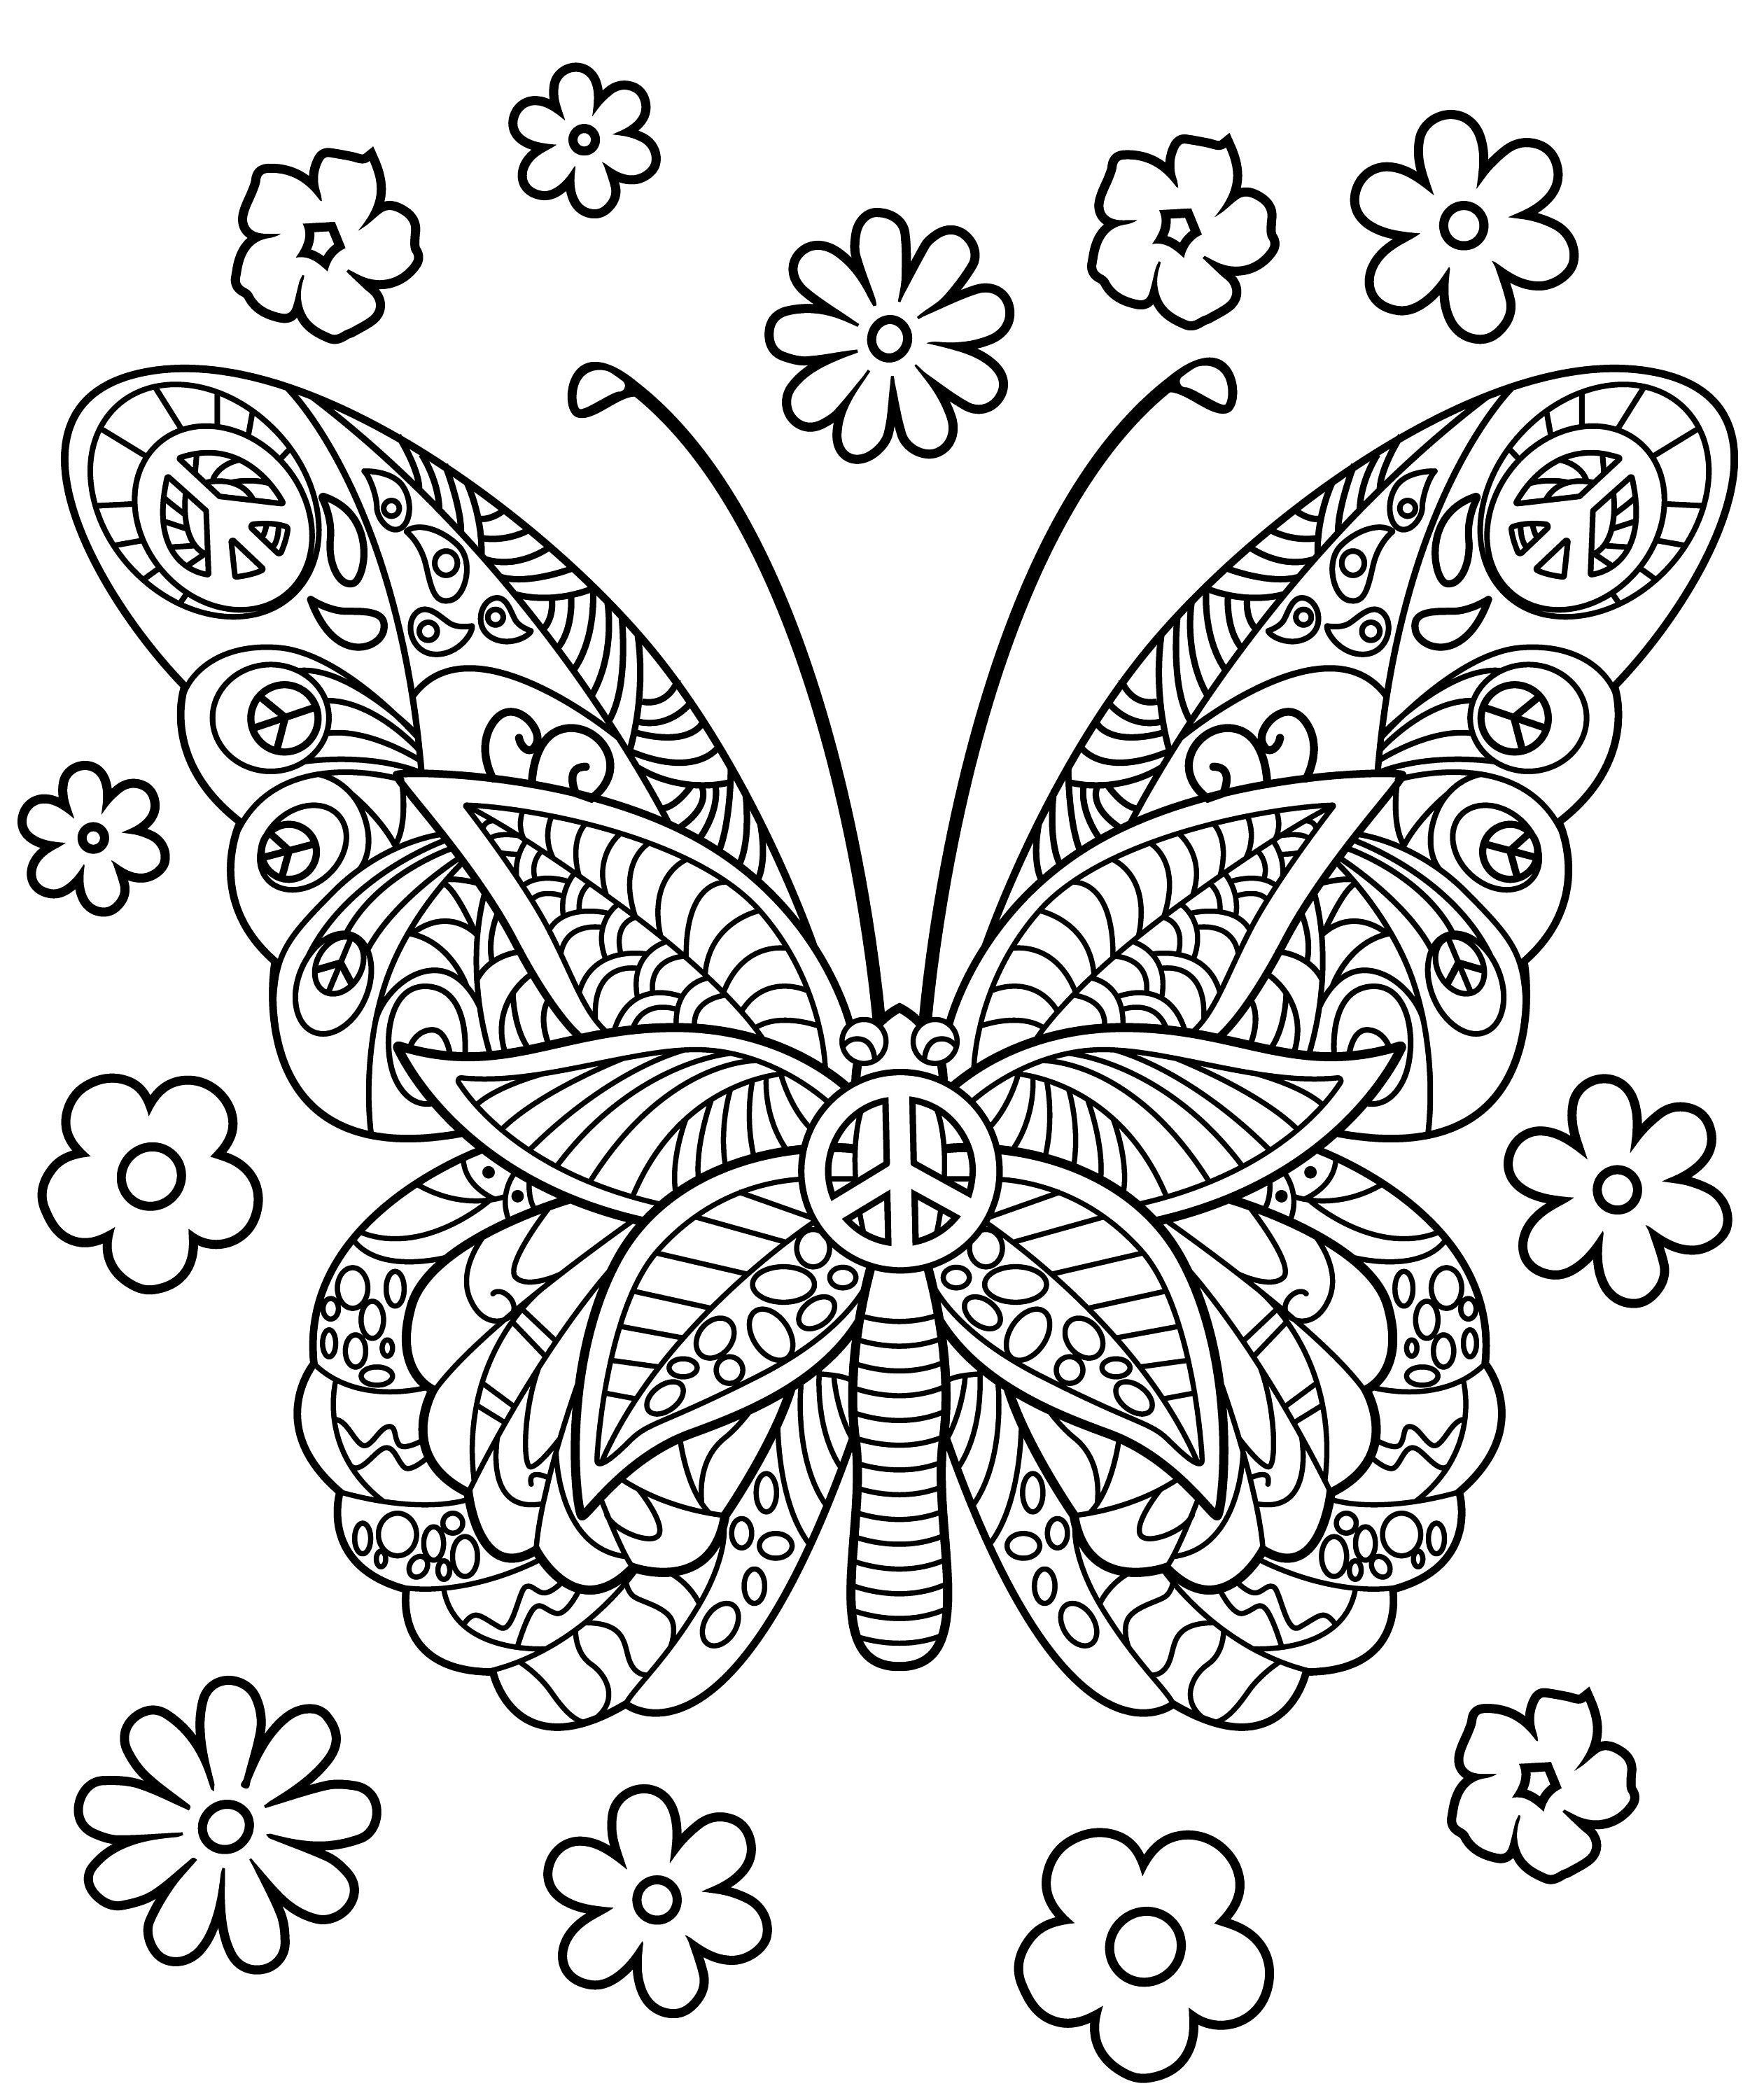 Papillons Spiroglyphics Coloring Book: 40 Spiral Coloring Pages Of  Beautiful Butterflies For Coloring And Having Fun | Gifts For Kids,  Children And